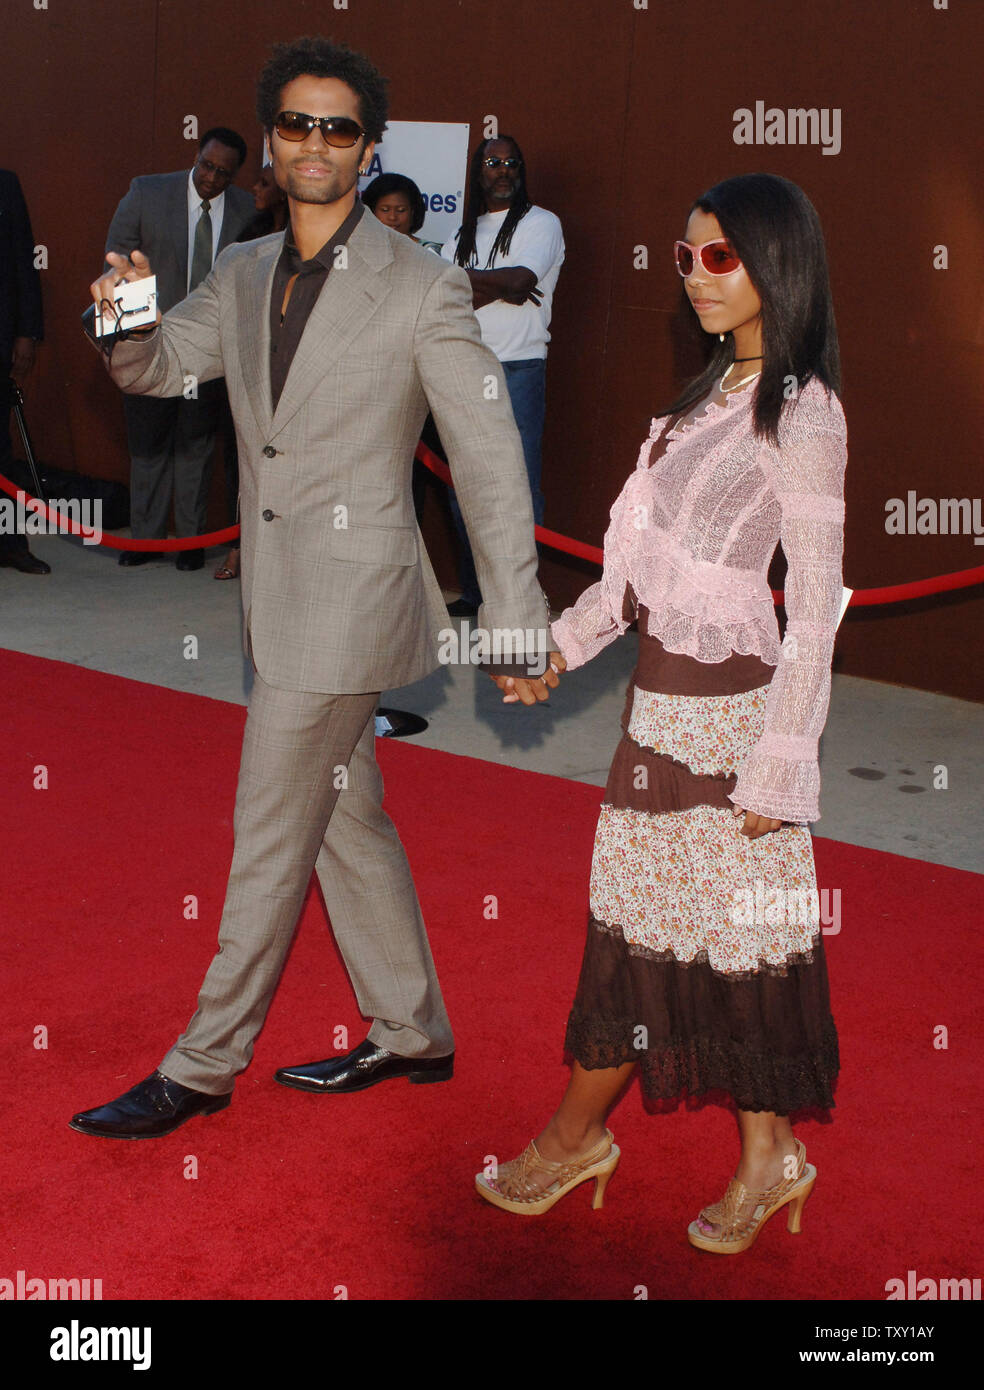 Singer Eric Benet and daughter India pose as they arrive at the tenth annual Soul Train Lady of Soul Awards in Pasadena, California September 7, 2005. The syndicated television awards show honors the accomplishments of female recording artists in the fields of Soul, R&B, Hip-Hop, Rap and Gospel music. (UPI Photo/Jim Ruymen) Stock Photo